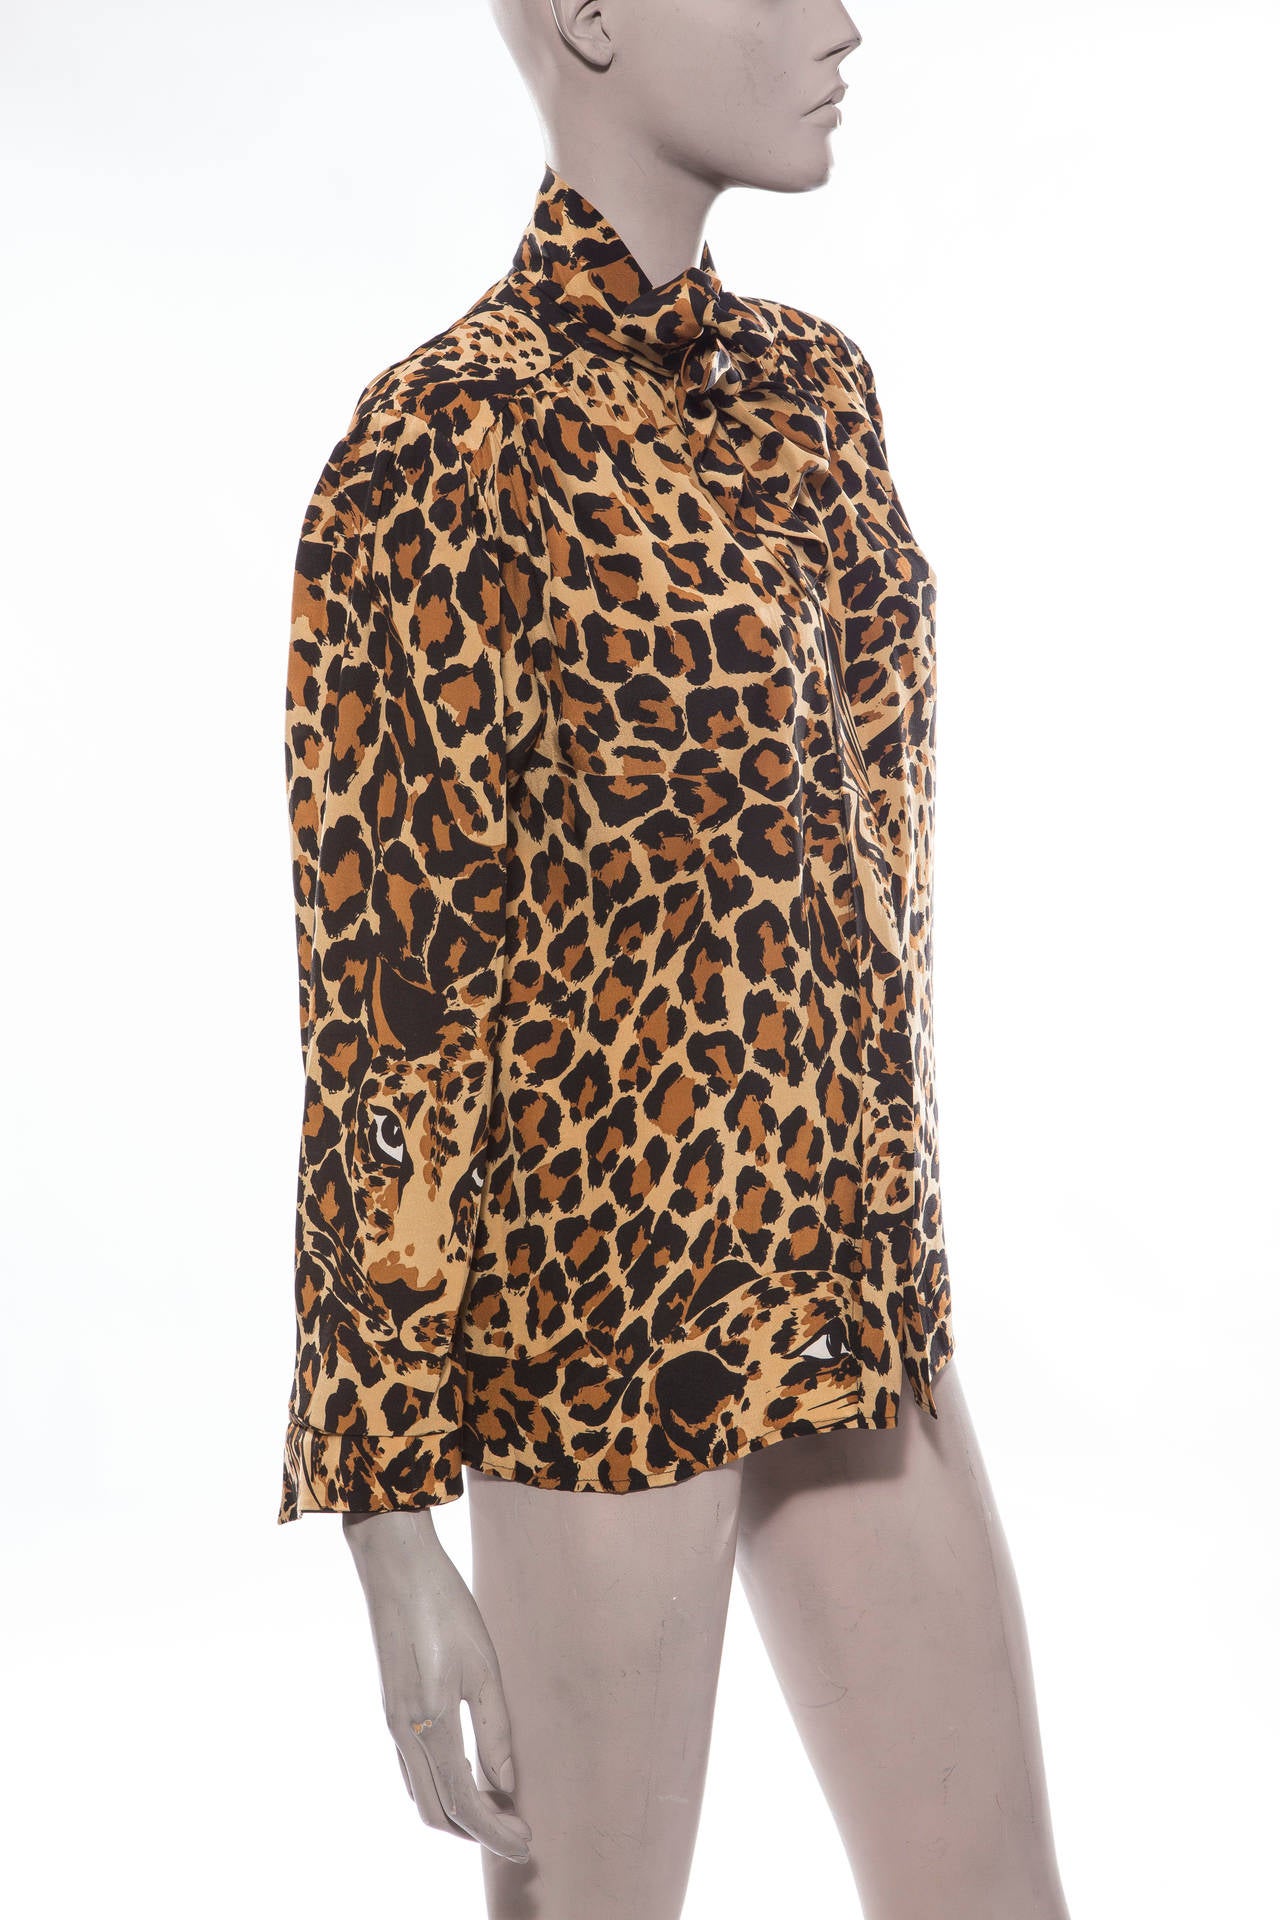 Yves Saint Laurent circa1990's long-sleeved leopard print blouse with hidden front buttons,.